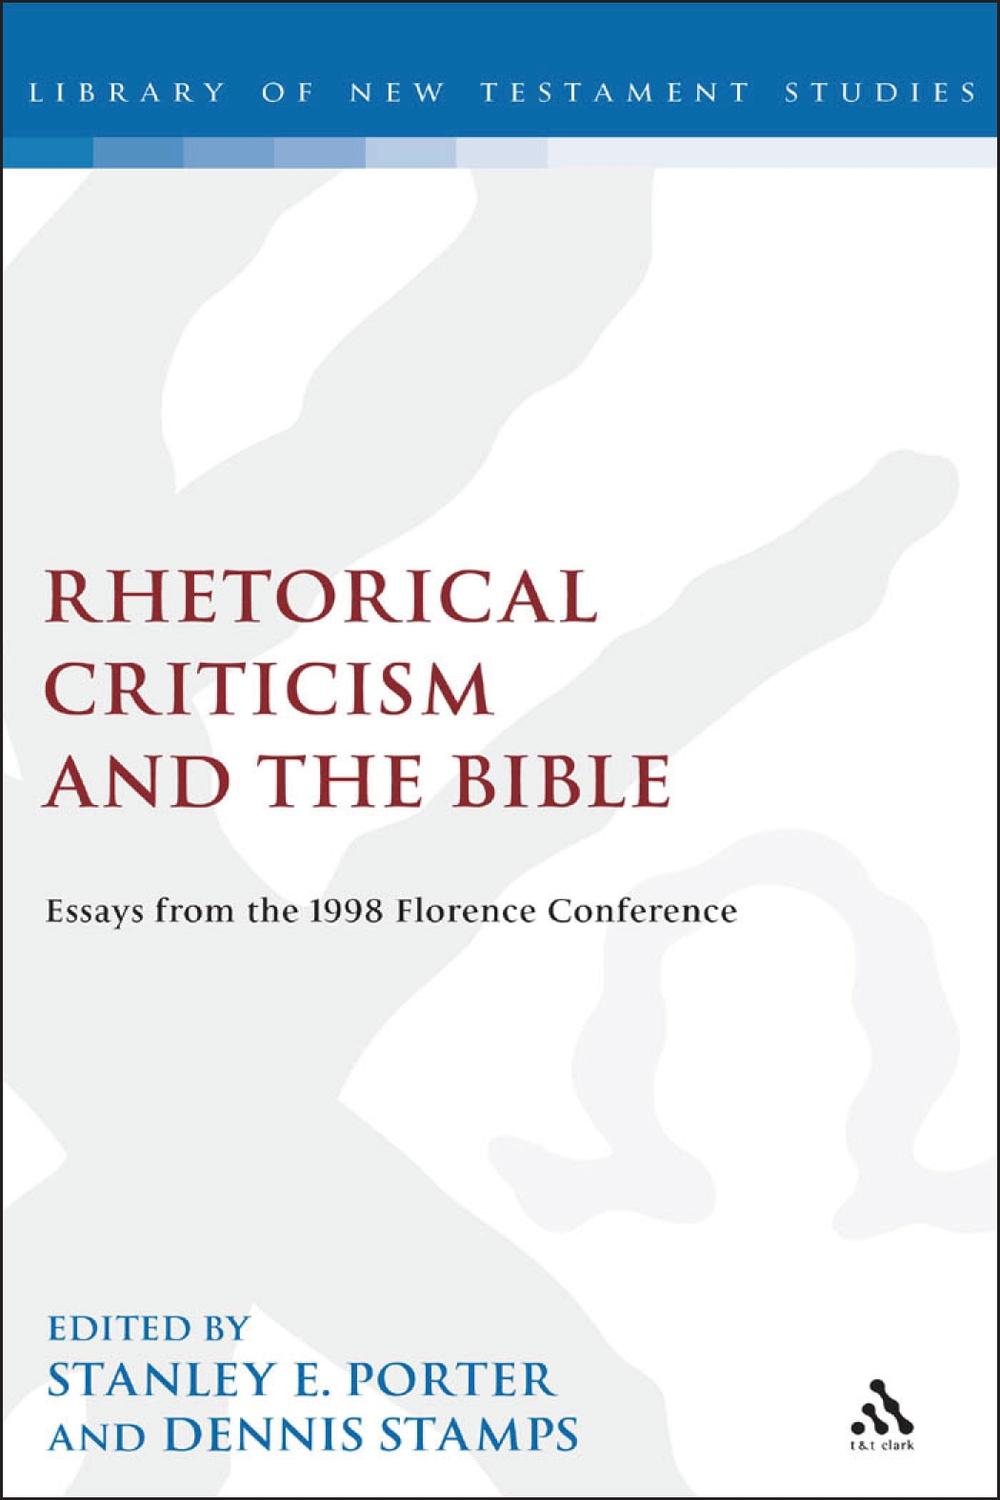 Rhetorical Criticism and the Bible - Stanley E. Porter, Dennis Stamps